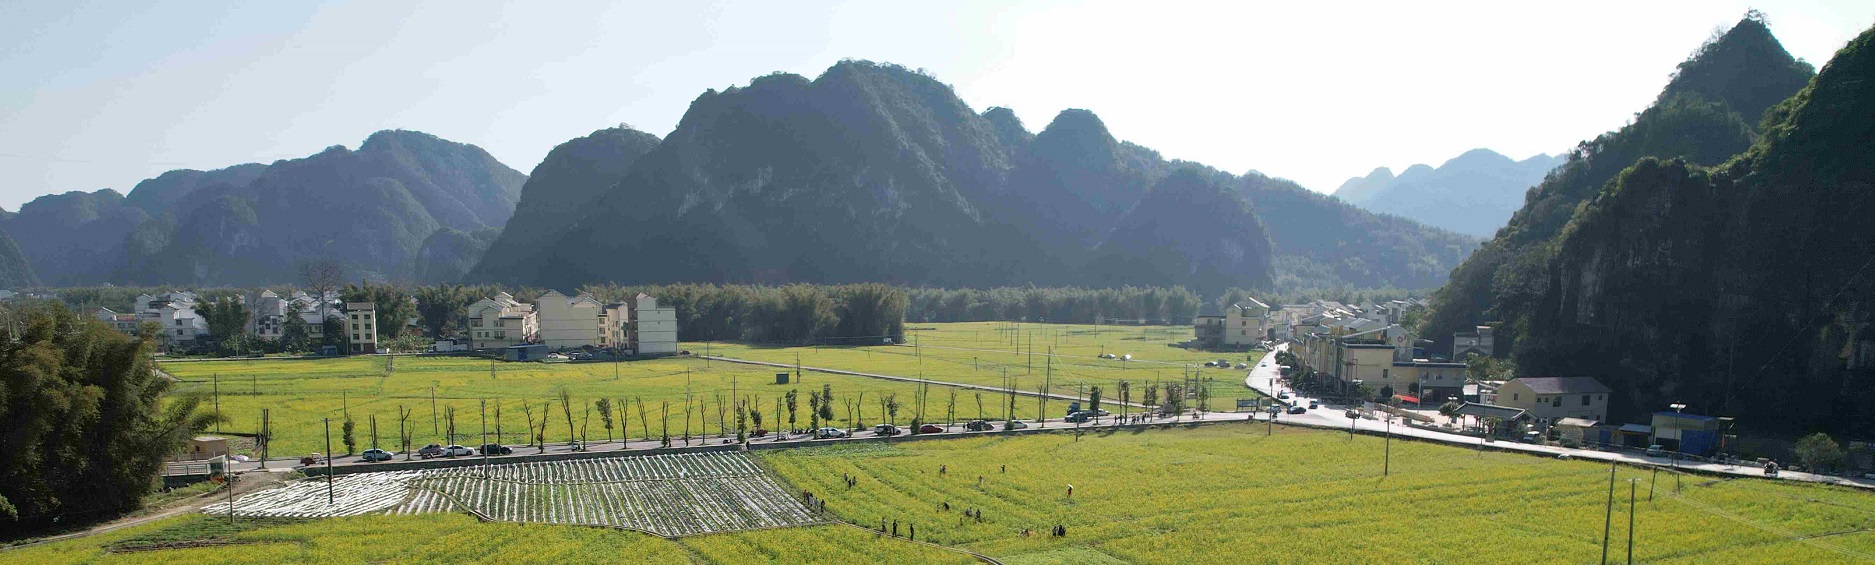 Visitors flock to Wuzhuan countryside complex